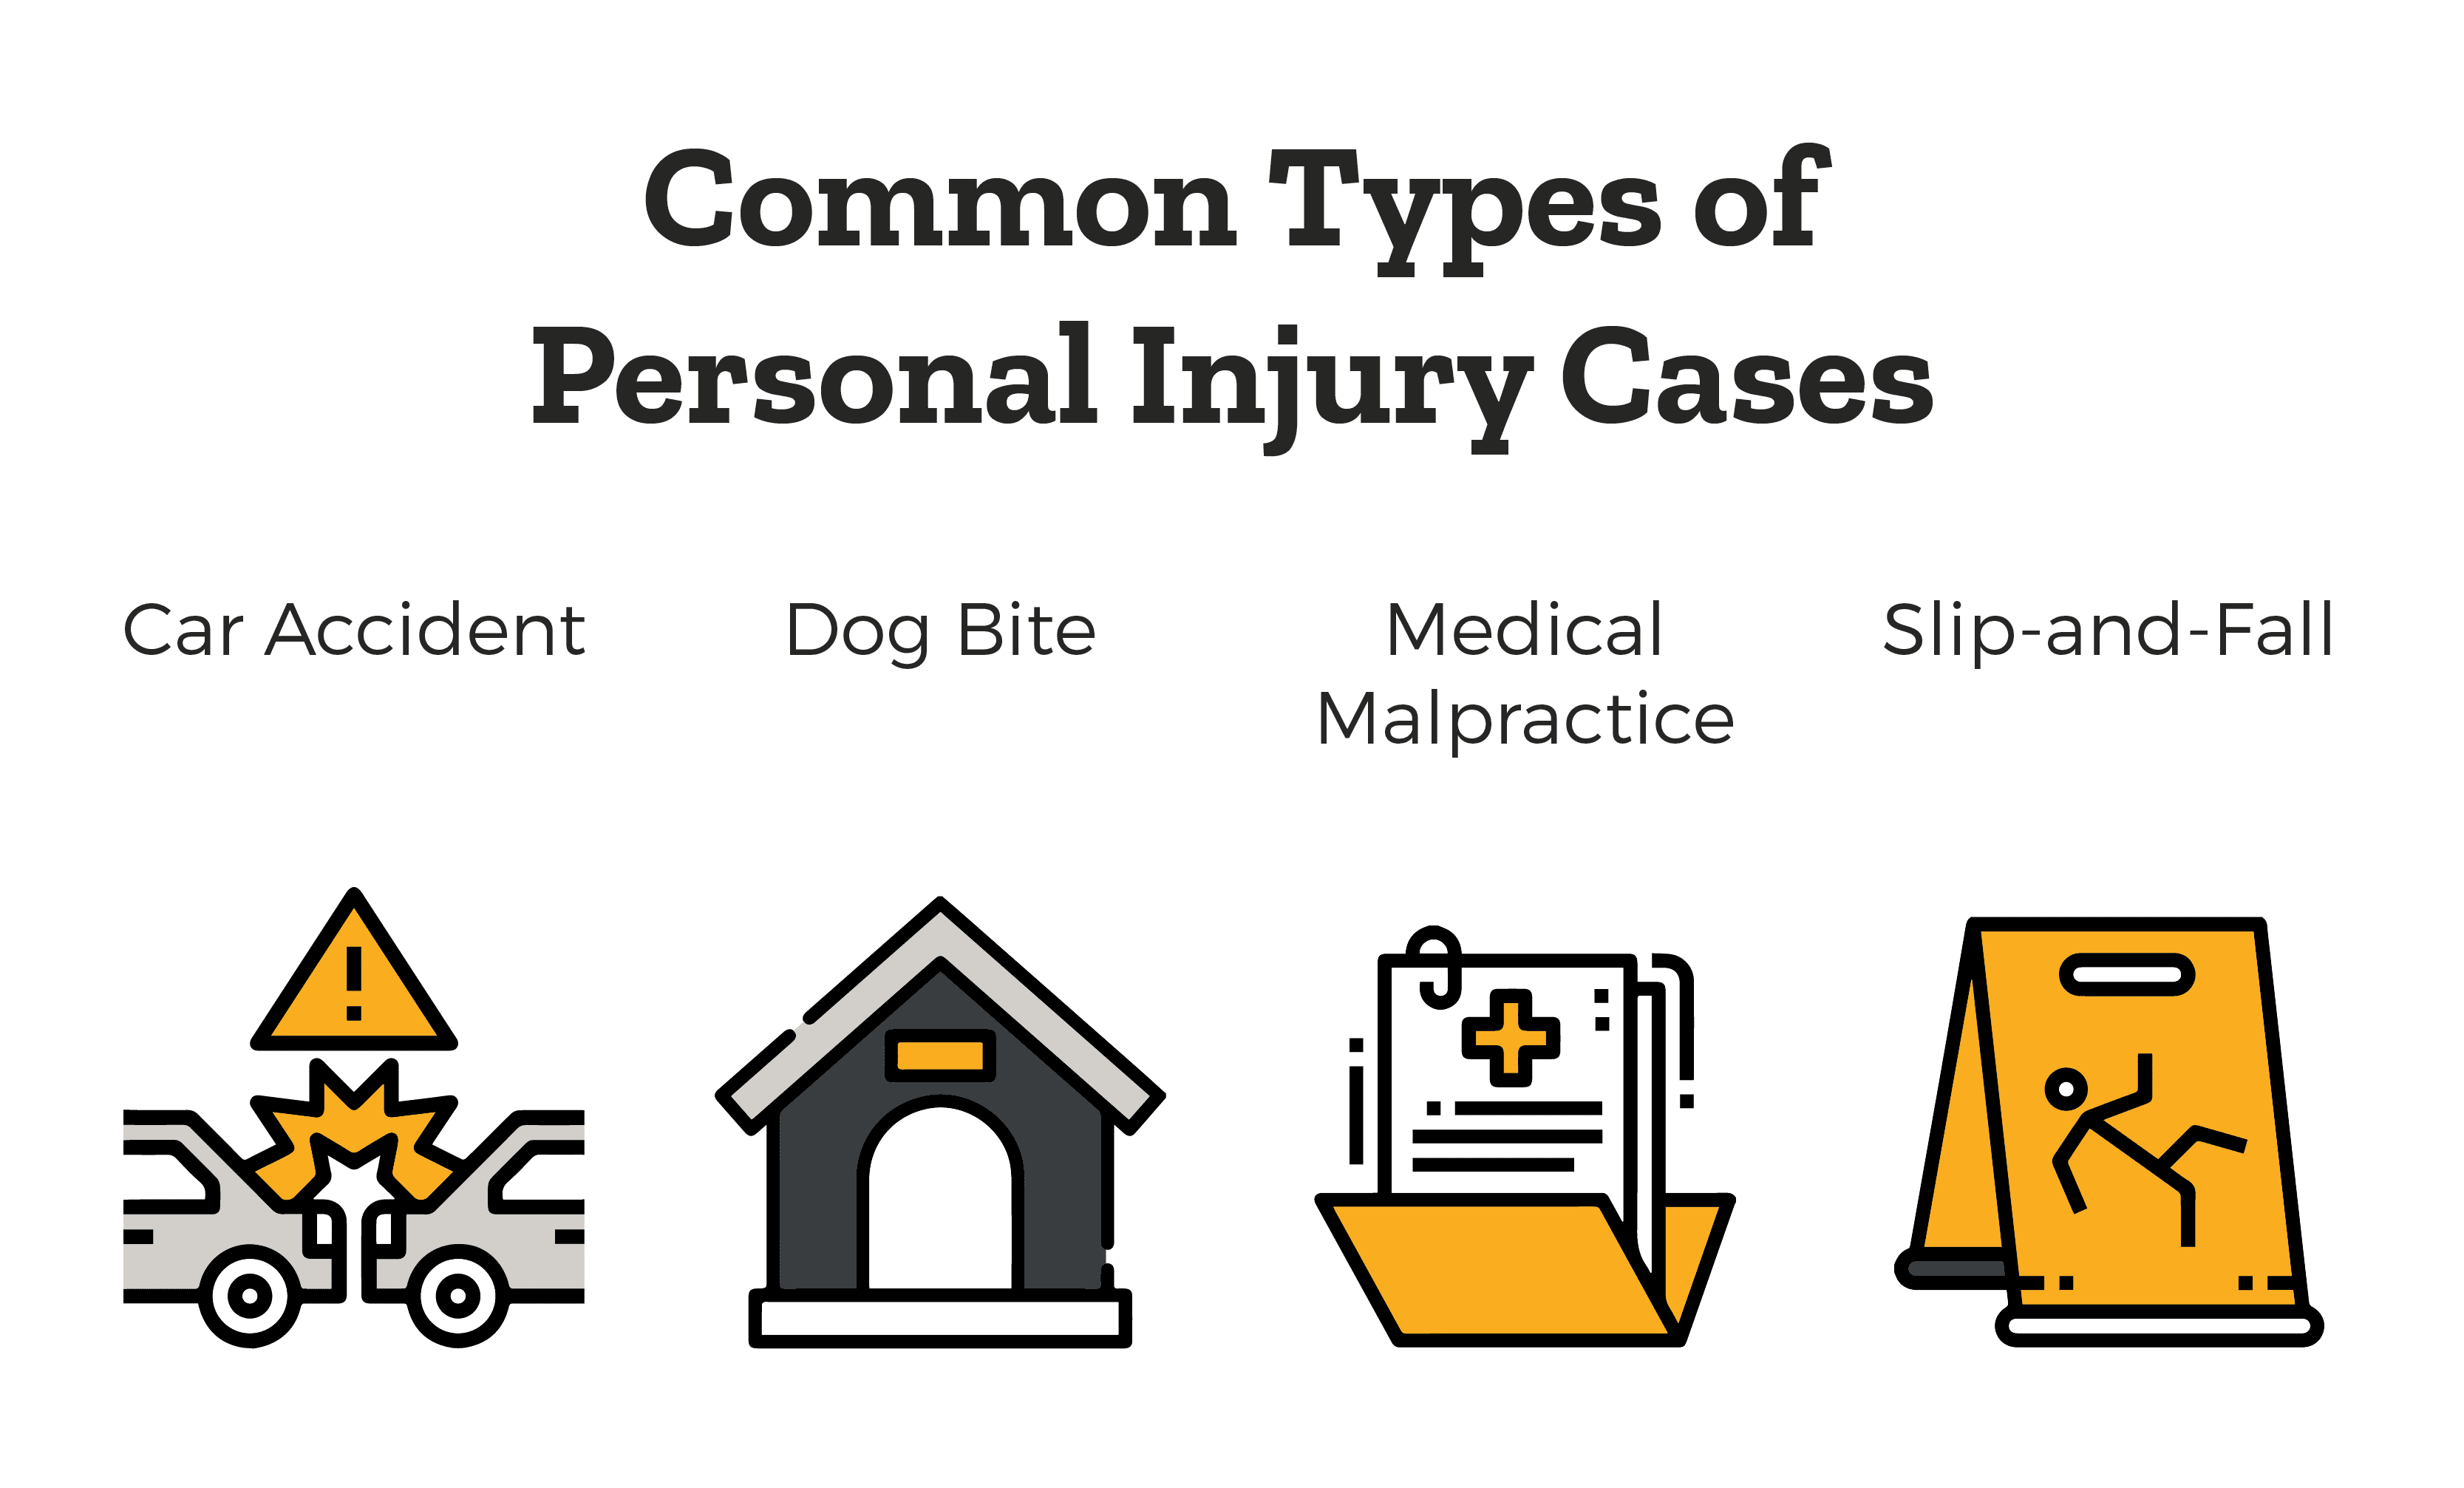 Most Common Types of Personal Injury Cases - Car accident, Dog bite, Medical Malpractice, and Slip and fall.